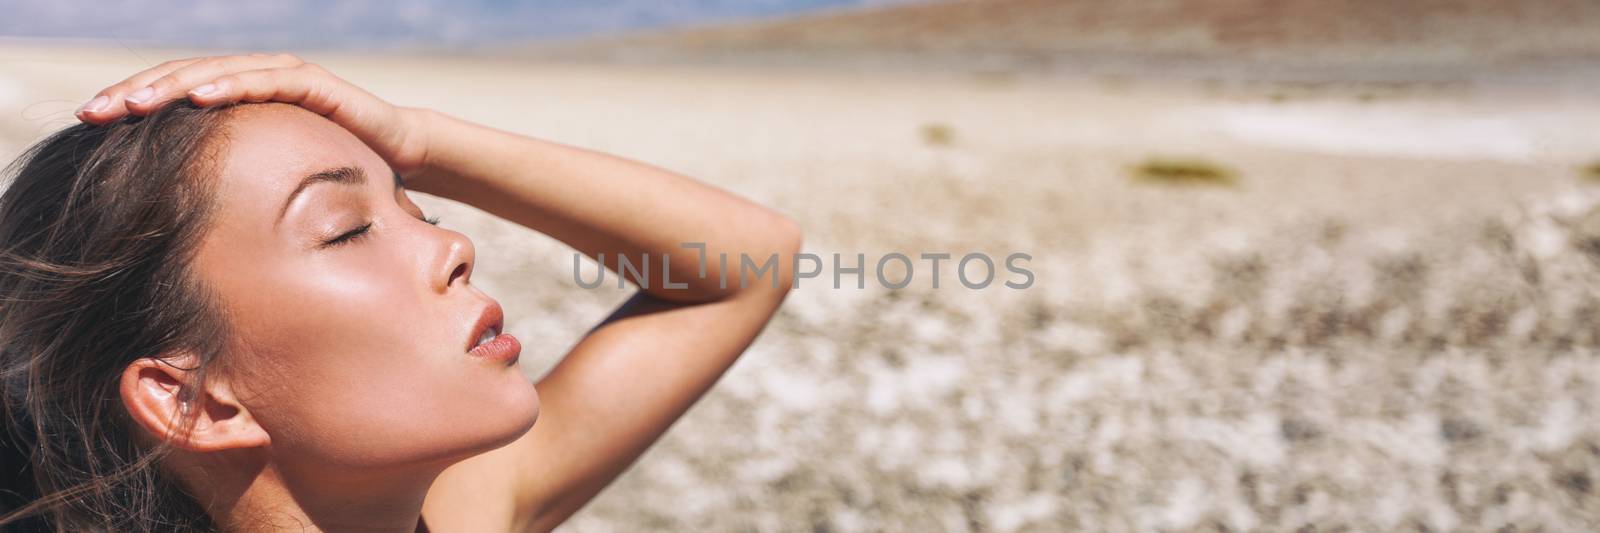 Heat stroke dehydrated girl in the desert sun hot temperature summer weather danger. Panoramic banner landscape with Asian woman tired sweating exhausted. by Maridav